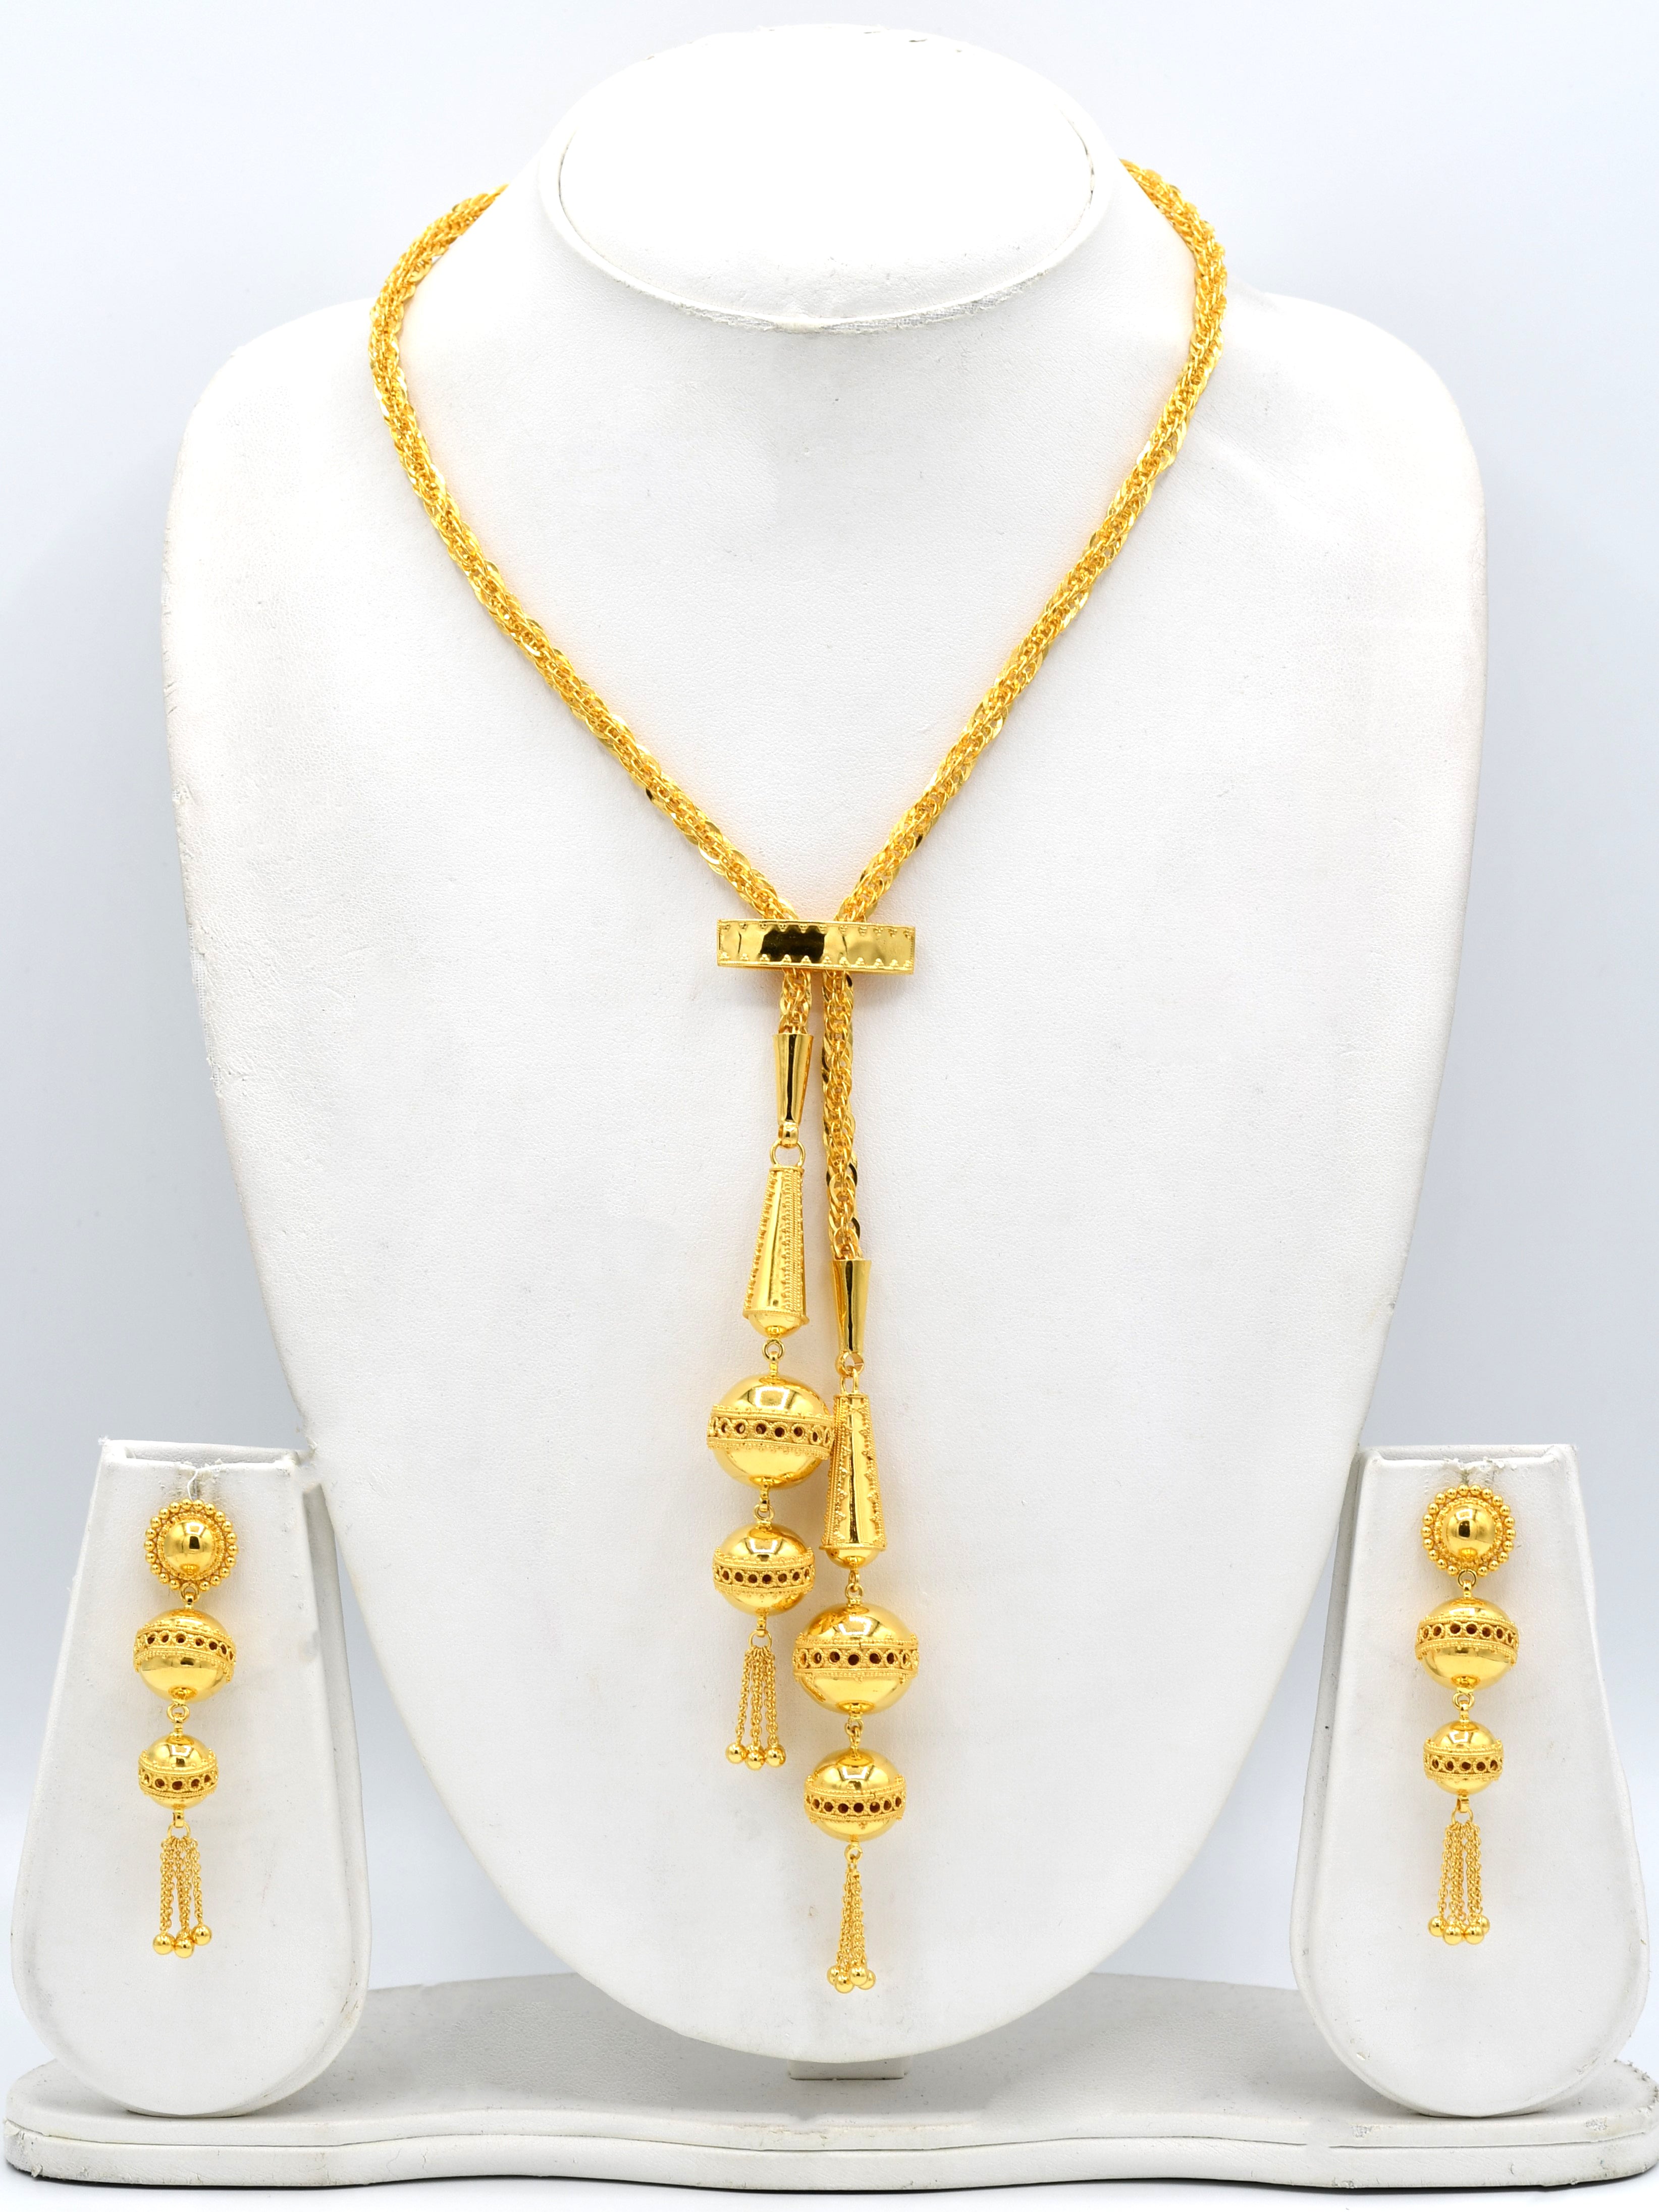 22ct Gold Necklaces | Minar Jewellers